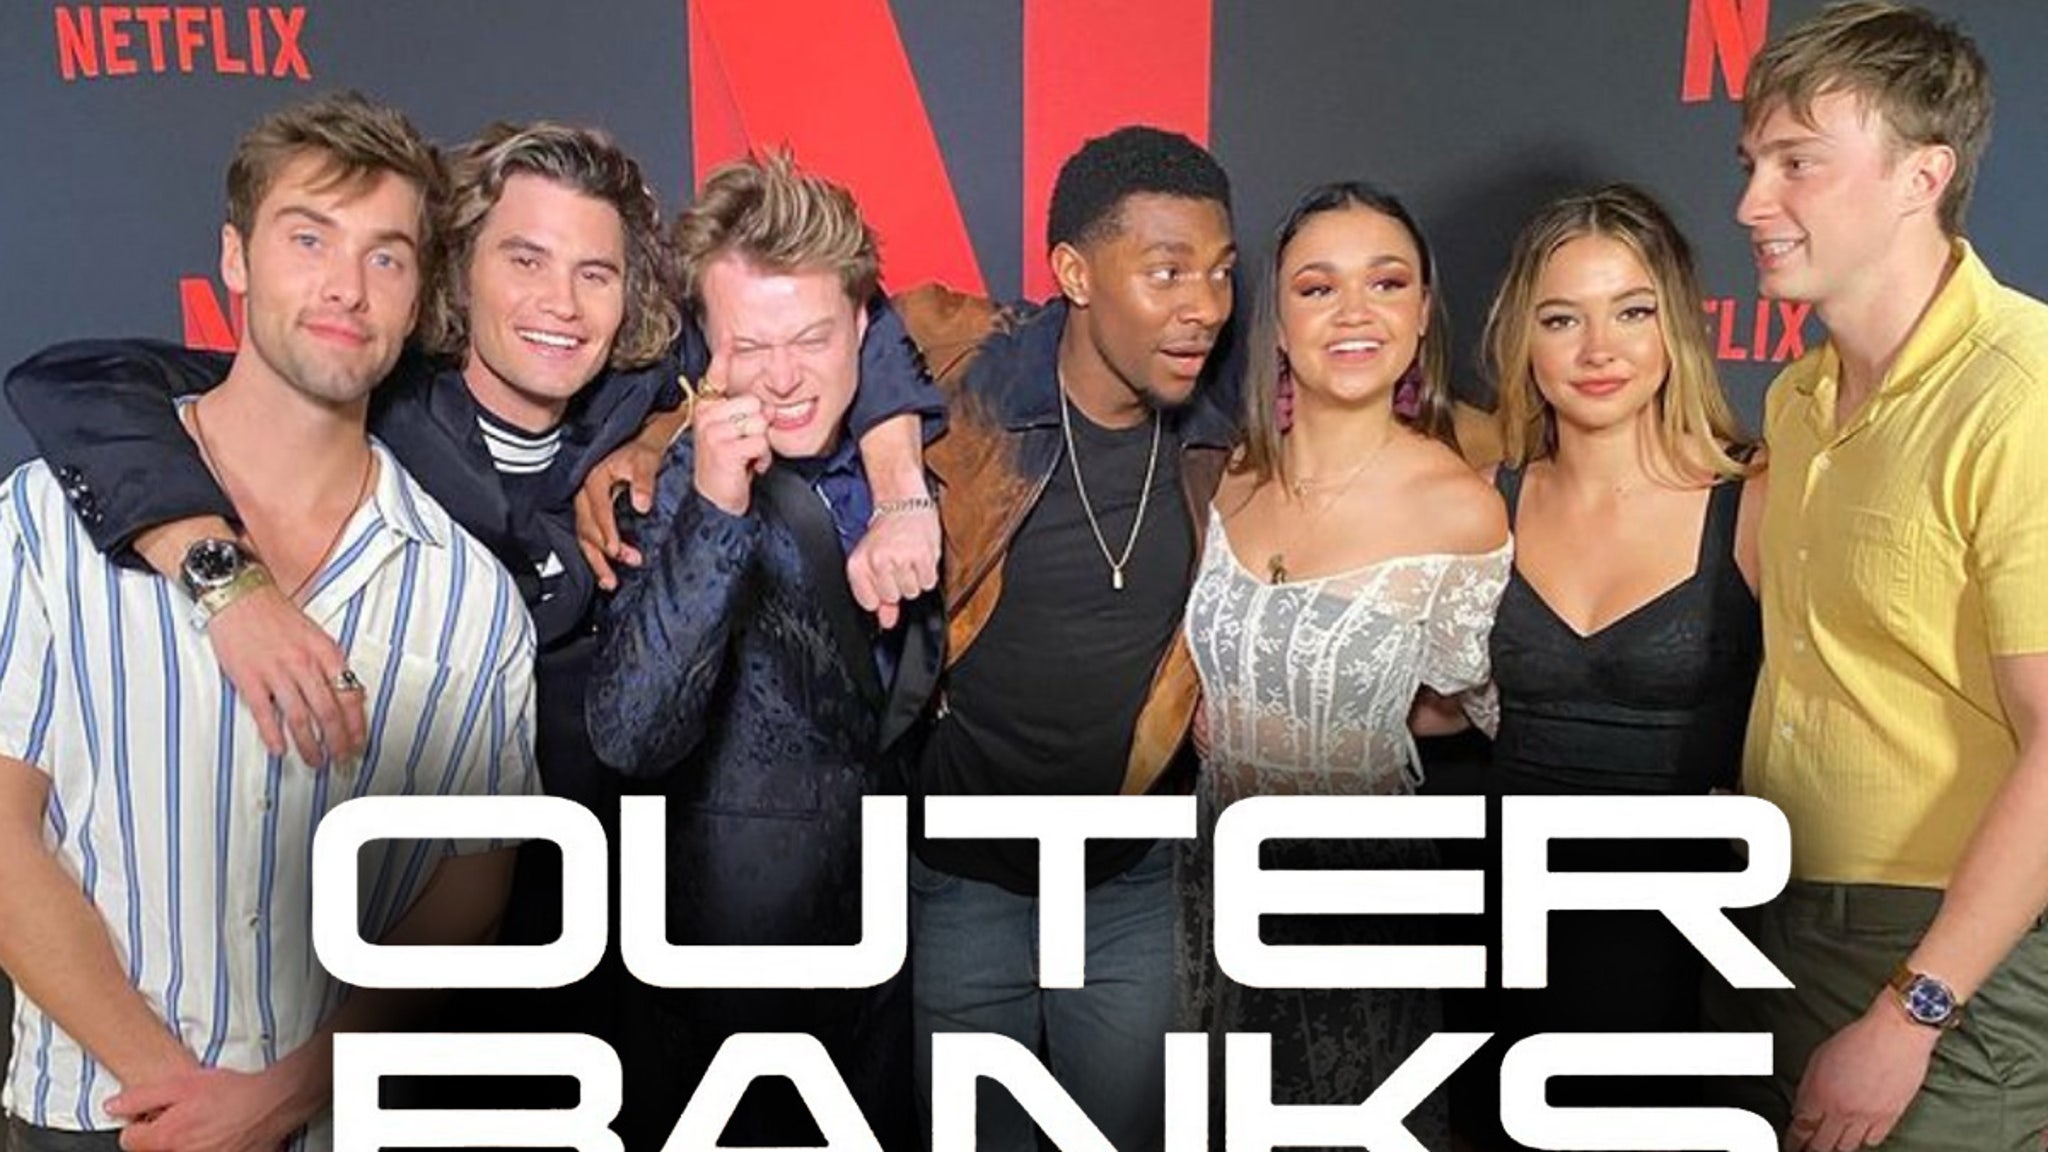 Netflix and creators of ‘Outer Banks’ sued by novelist alleging blatant theft